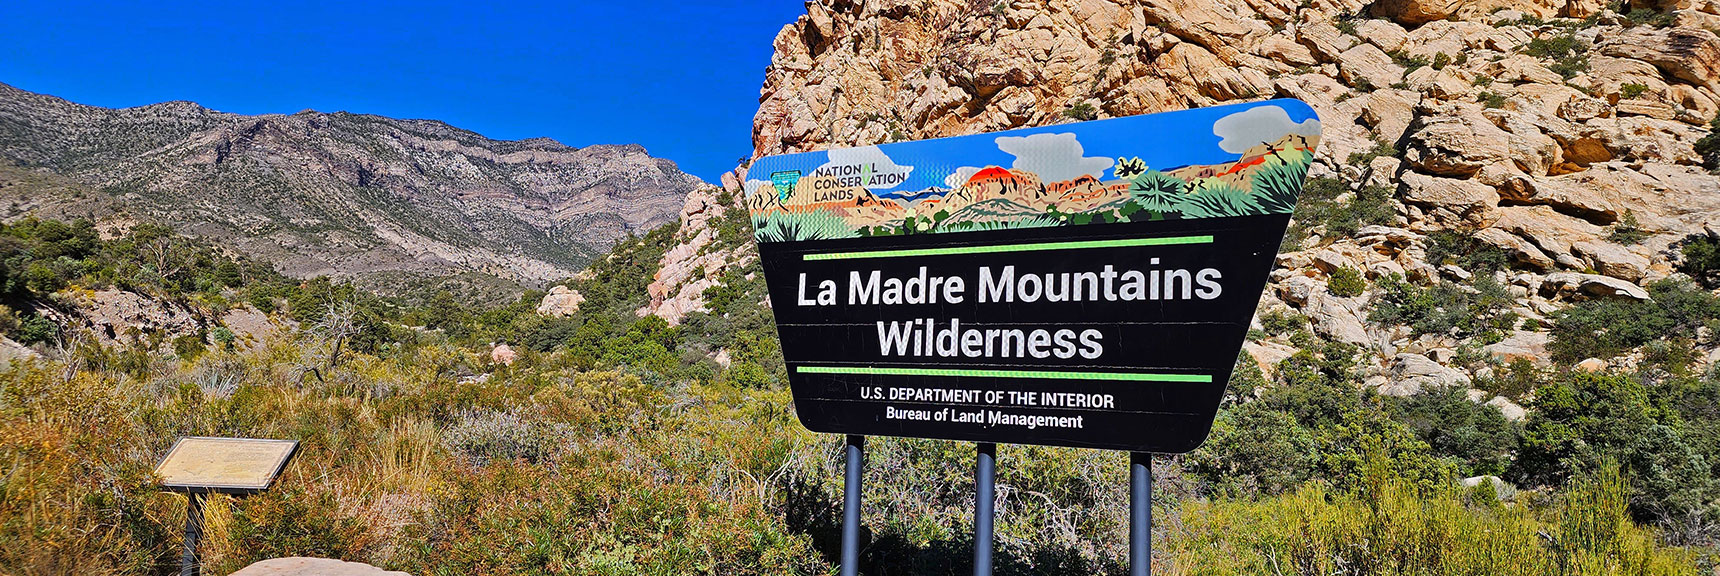 La Madre Mts. Wilderness and Red Rock Canyon (Willow Spring) are Today's Other 2 Wilderness Areas | Switchback Spring Ridge | Red Rock Canyon, Nevada